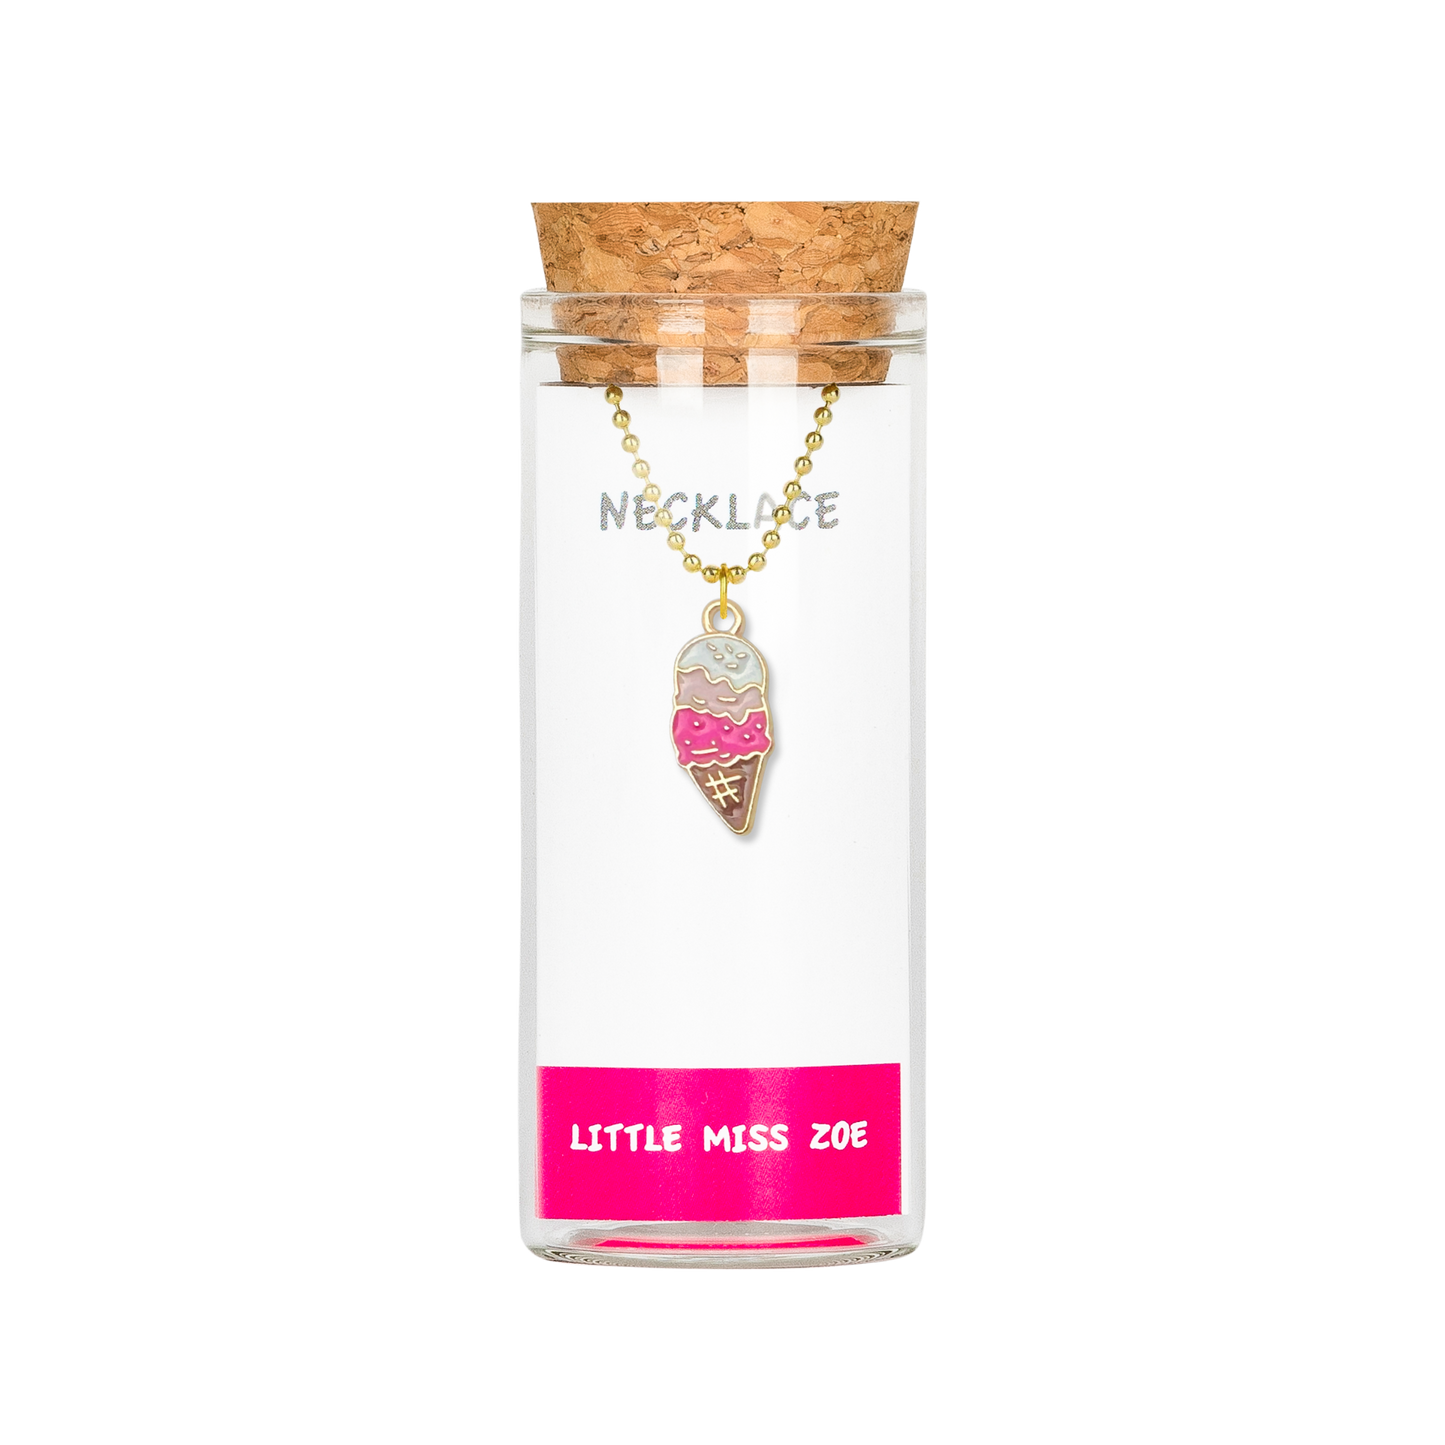 Ice Cream Necklace in a Bottle